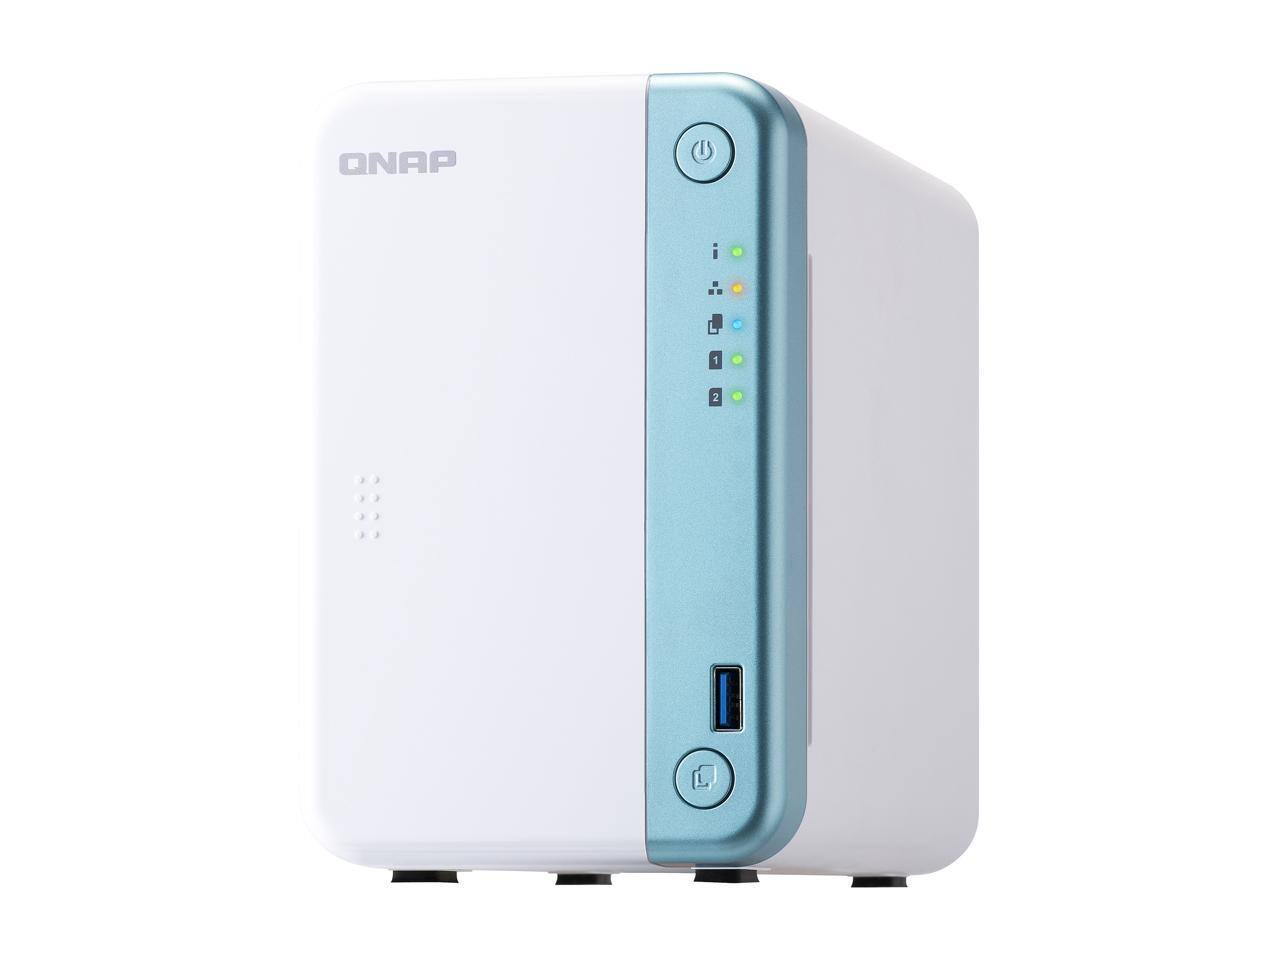 QNAP Network Storage Sale, Systems & Combo Deals including QNAP TS-251D-2G-US Diskless System Network Storage for $269 + FS